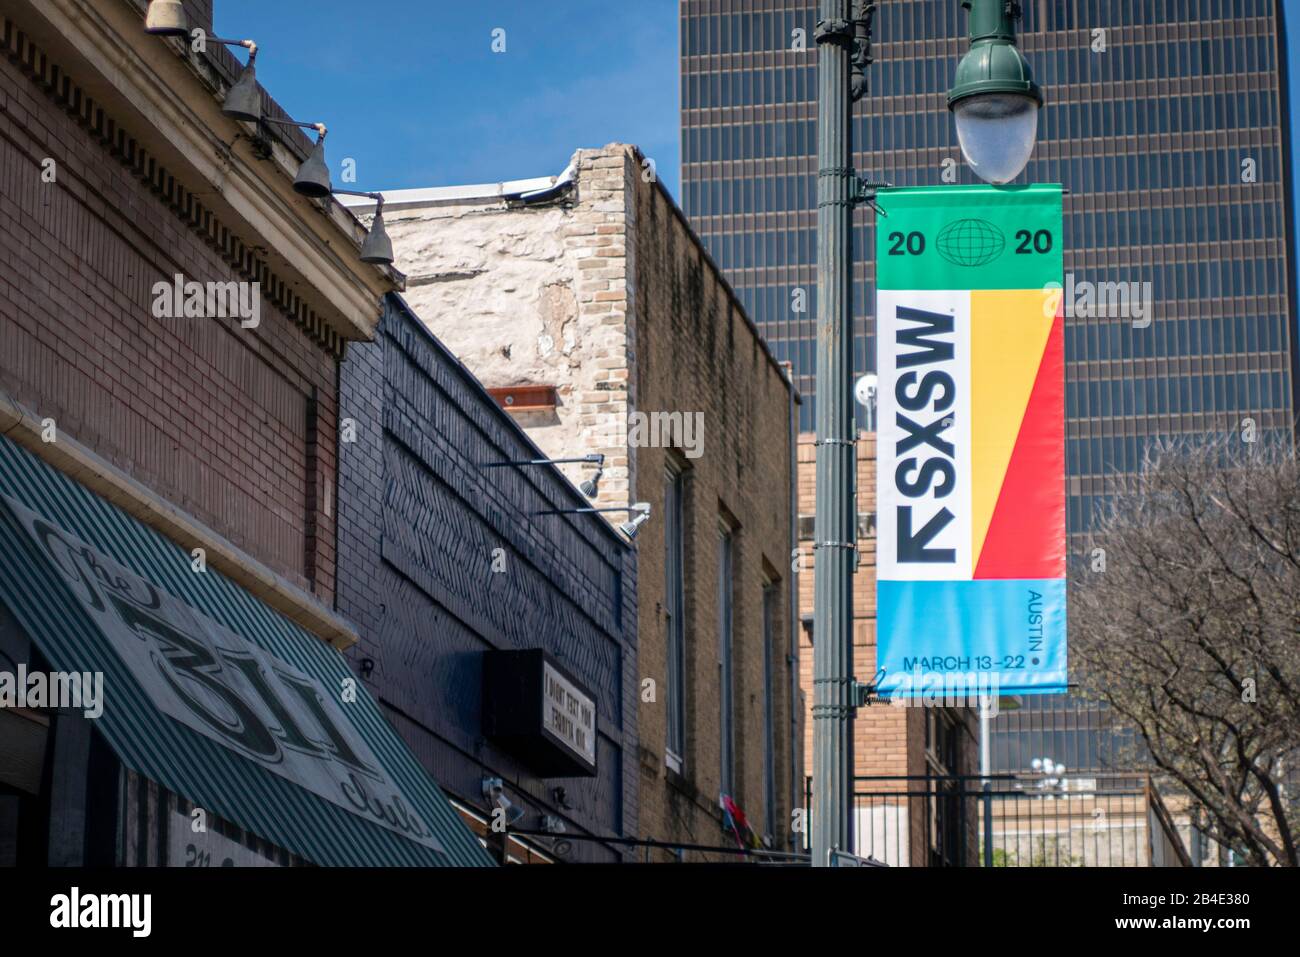 Austin, Texas - March 6, 2020: 2020 South by Southwest (SXSW) conference and festival banner in downtown Austin Stock Photo